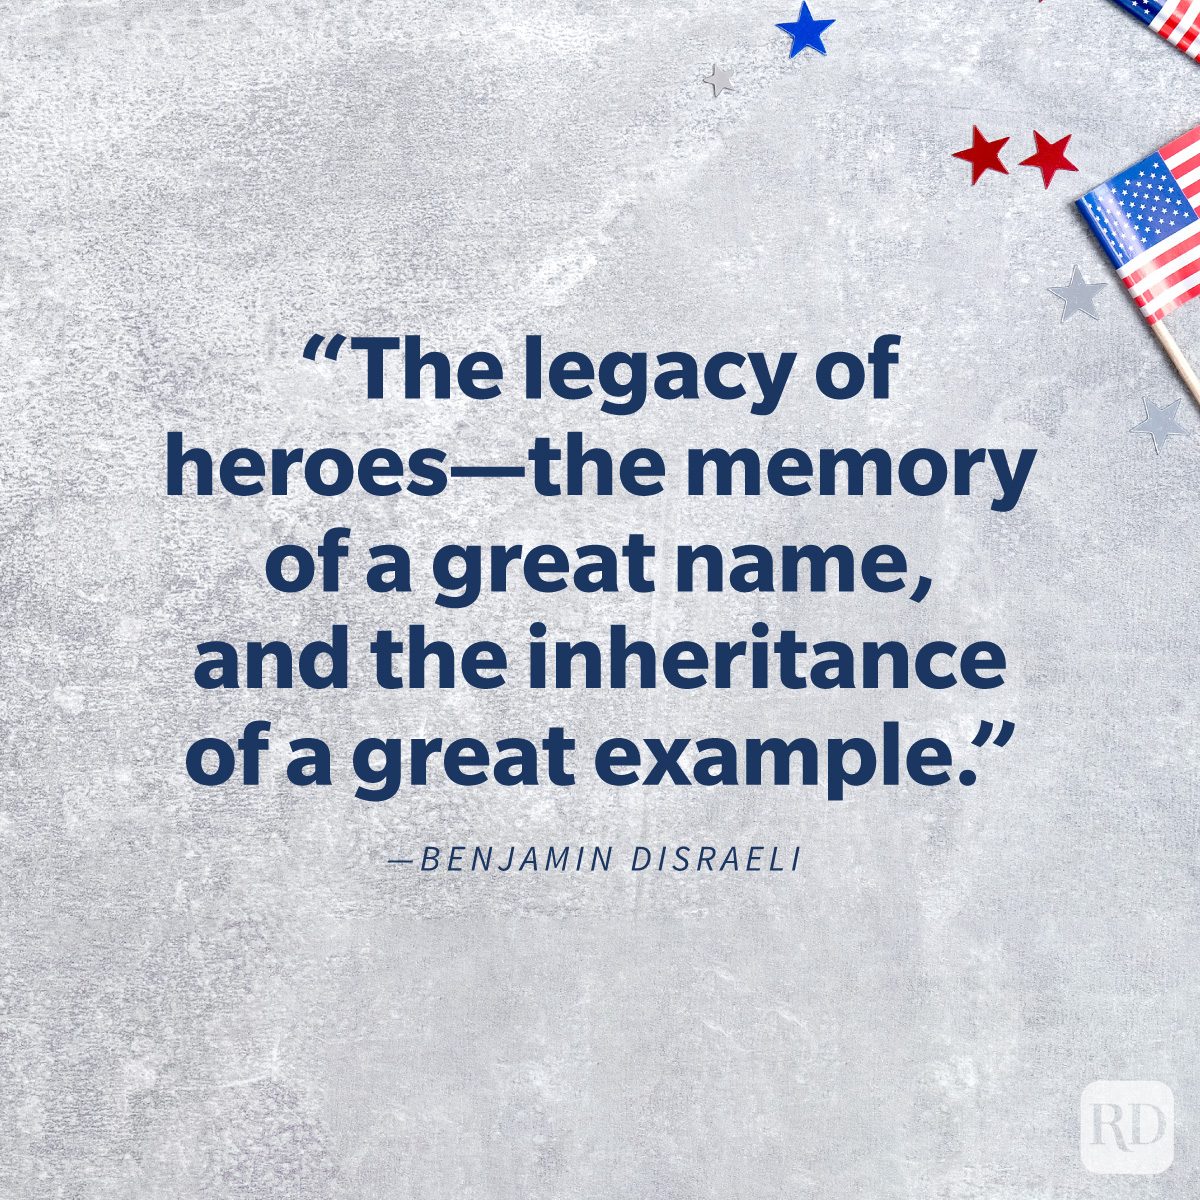 Memorial Day Quotes To Share In Honor And Remembrance “The legacy of heroes—the memory of a great name, and the inheritance of a great example.” by Benjamin Disraeli on background of flags and confetti stars on concrete stone